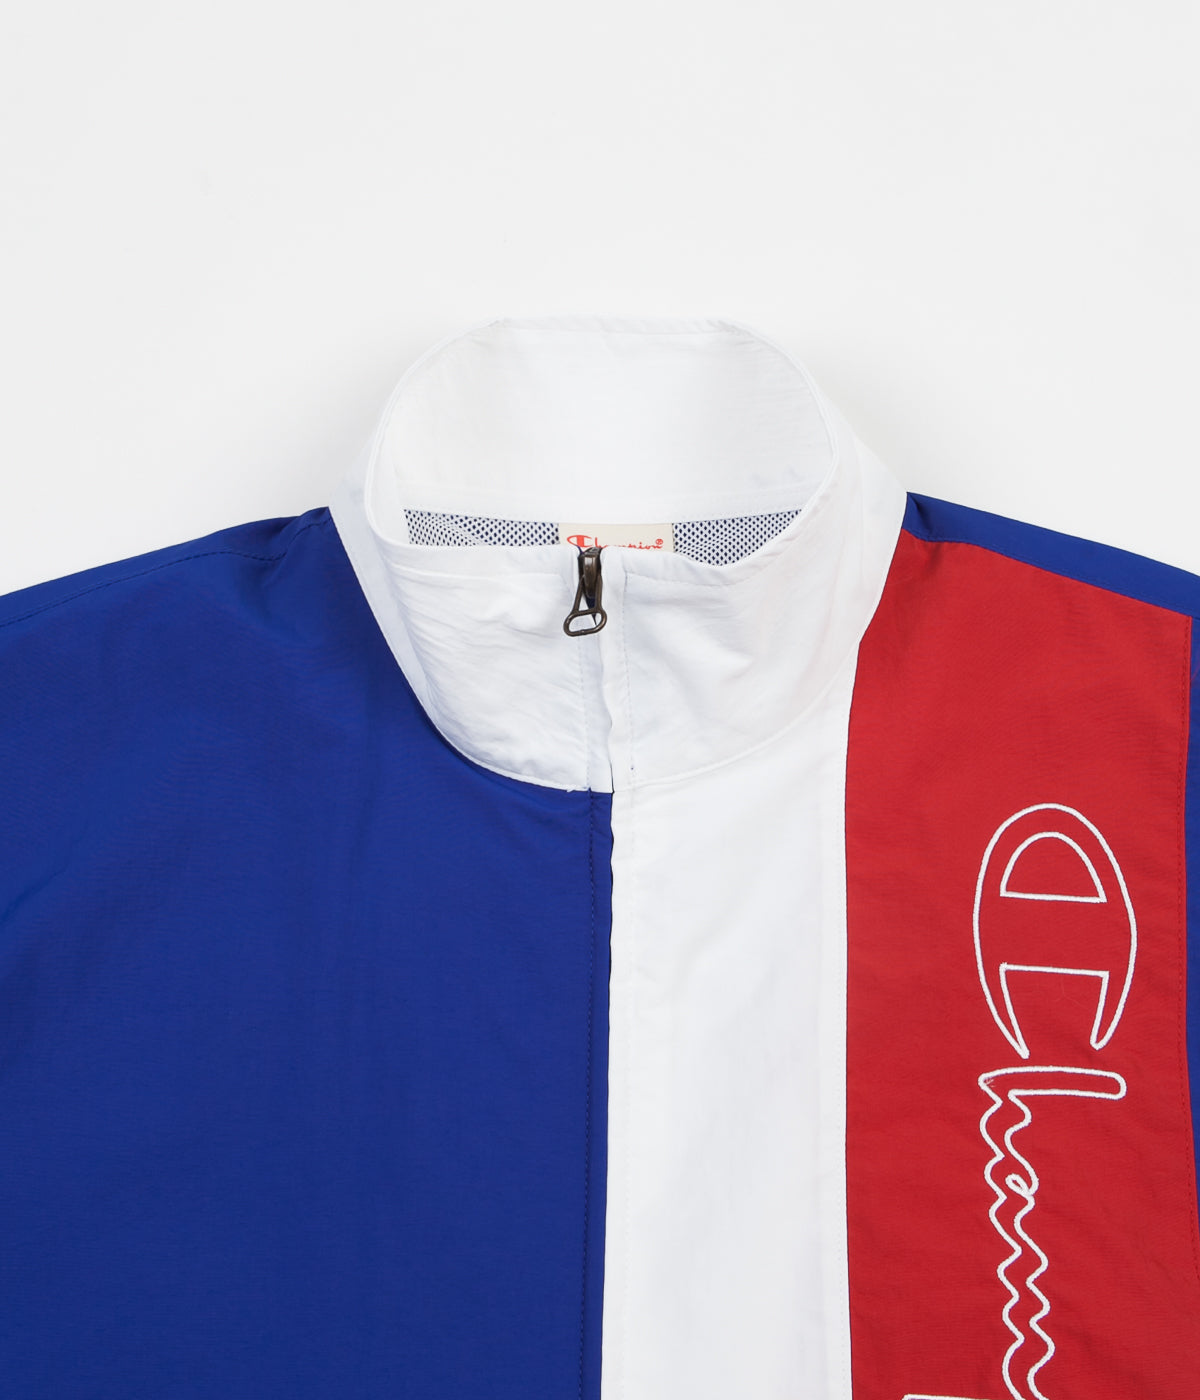 blue and red champion shirt